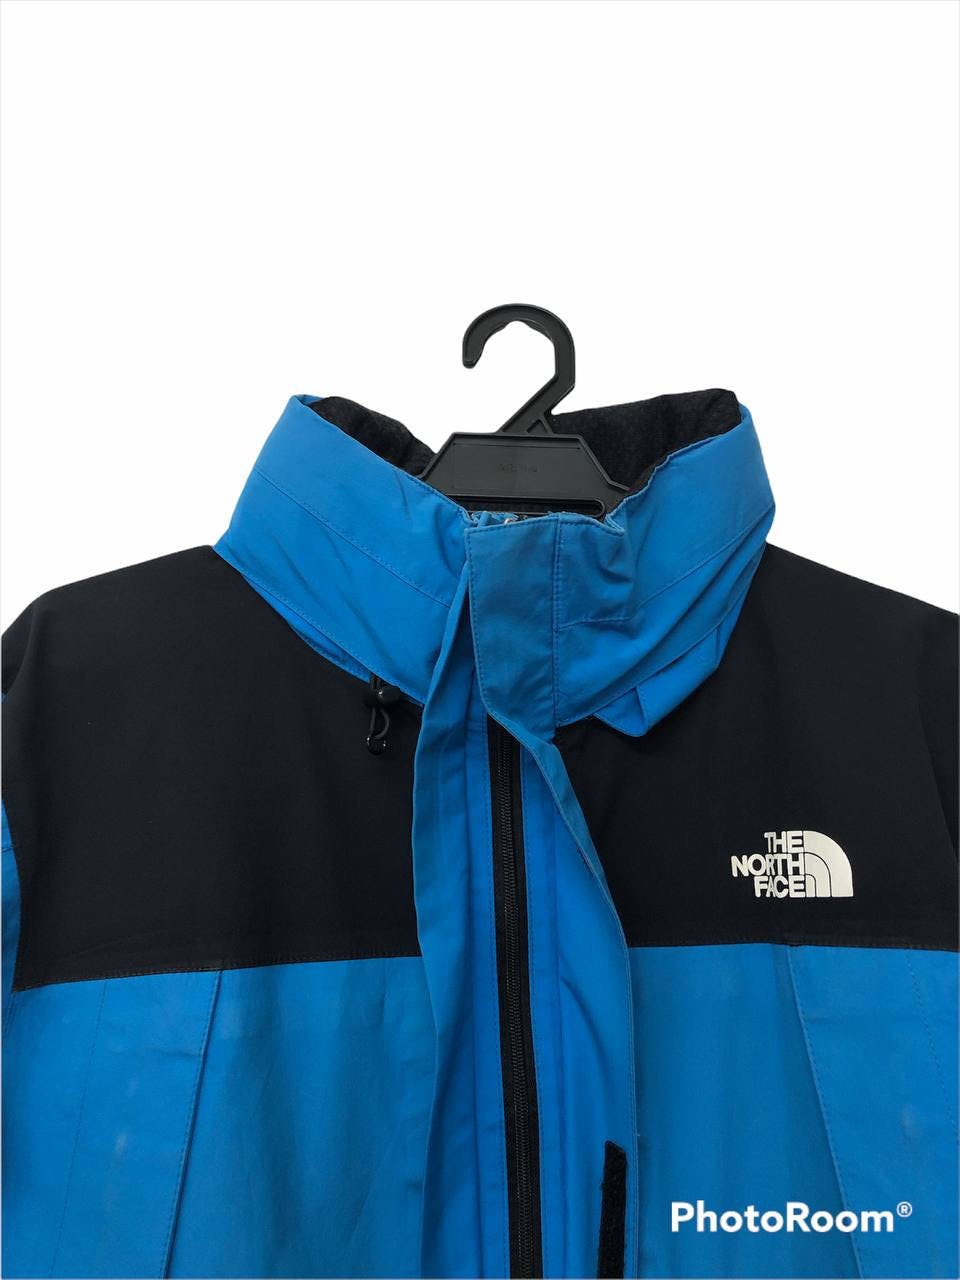 The north face lockof Gore-Tex Pro Shell - 17